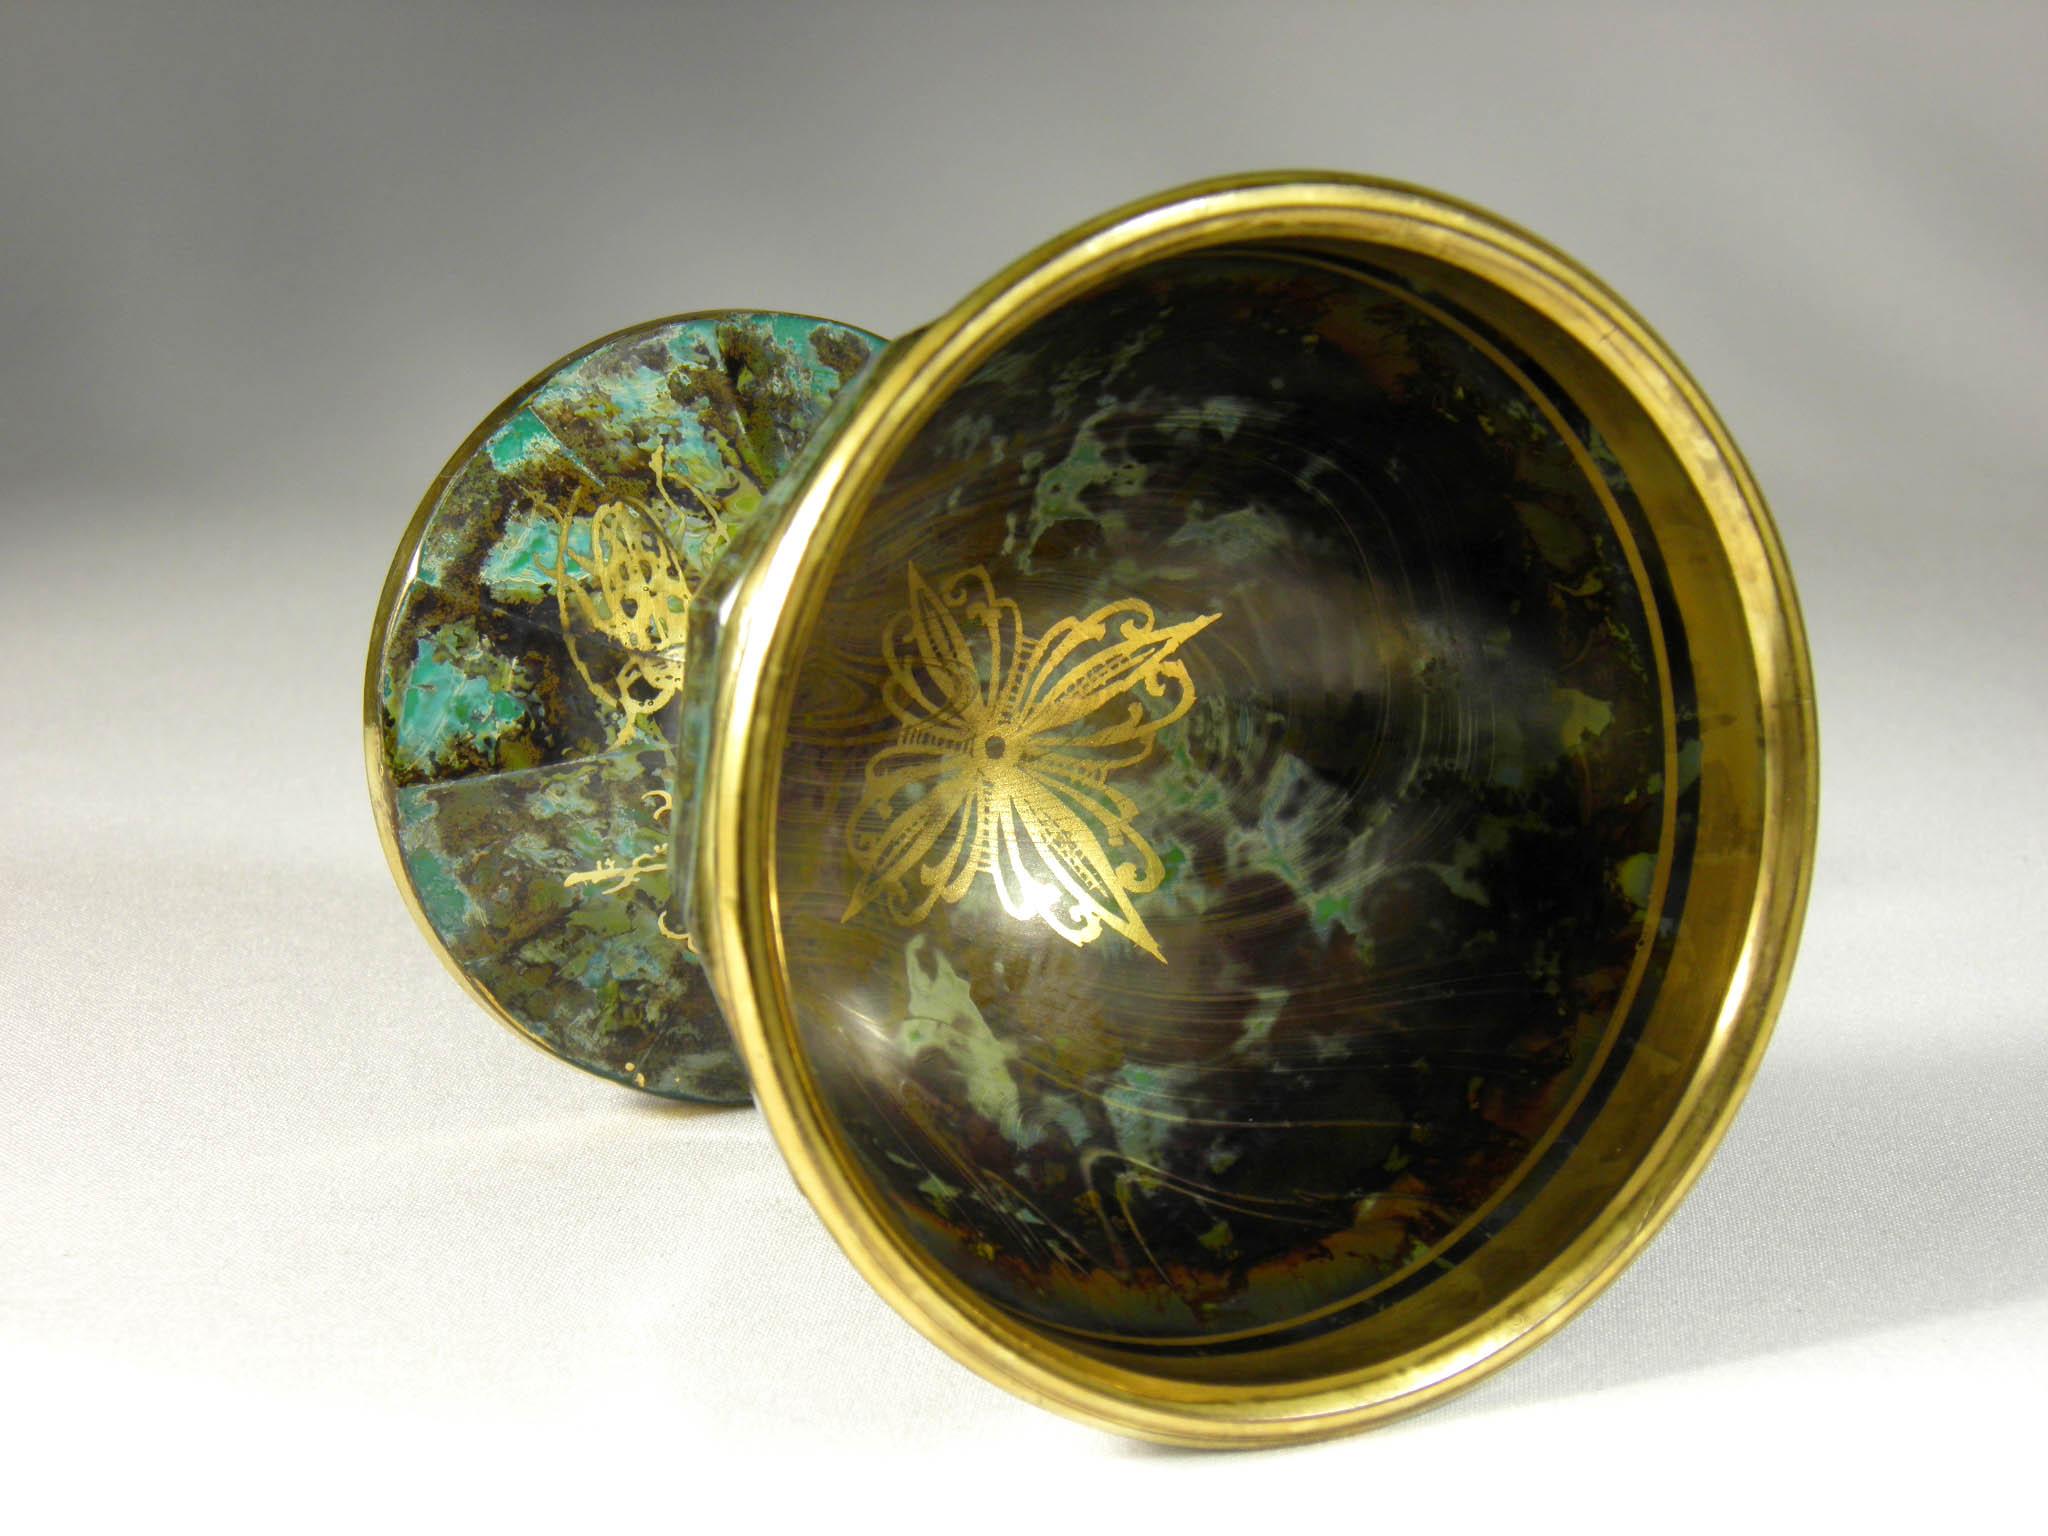 Hand-Crafted Pair of Bowls with Imitation Semi-Precious Stone Bohemian Glass, 20th Century